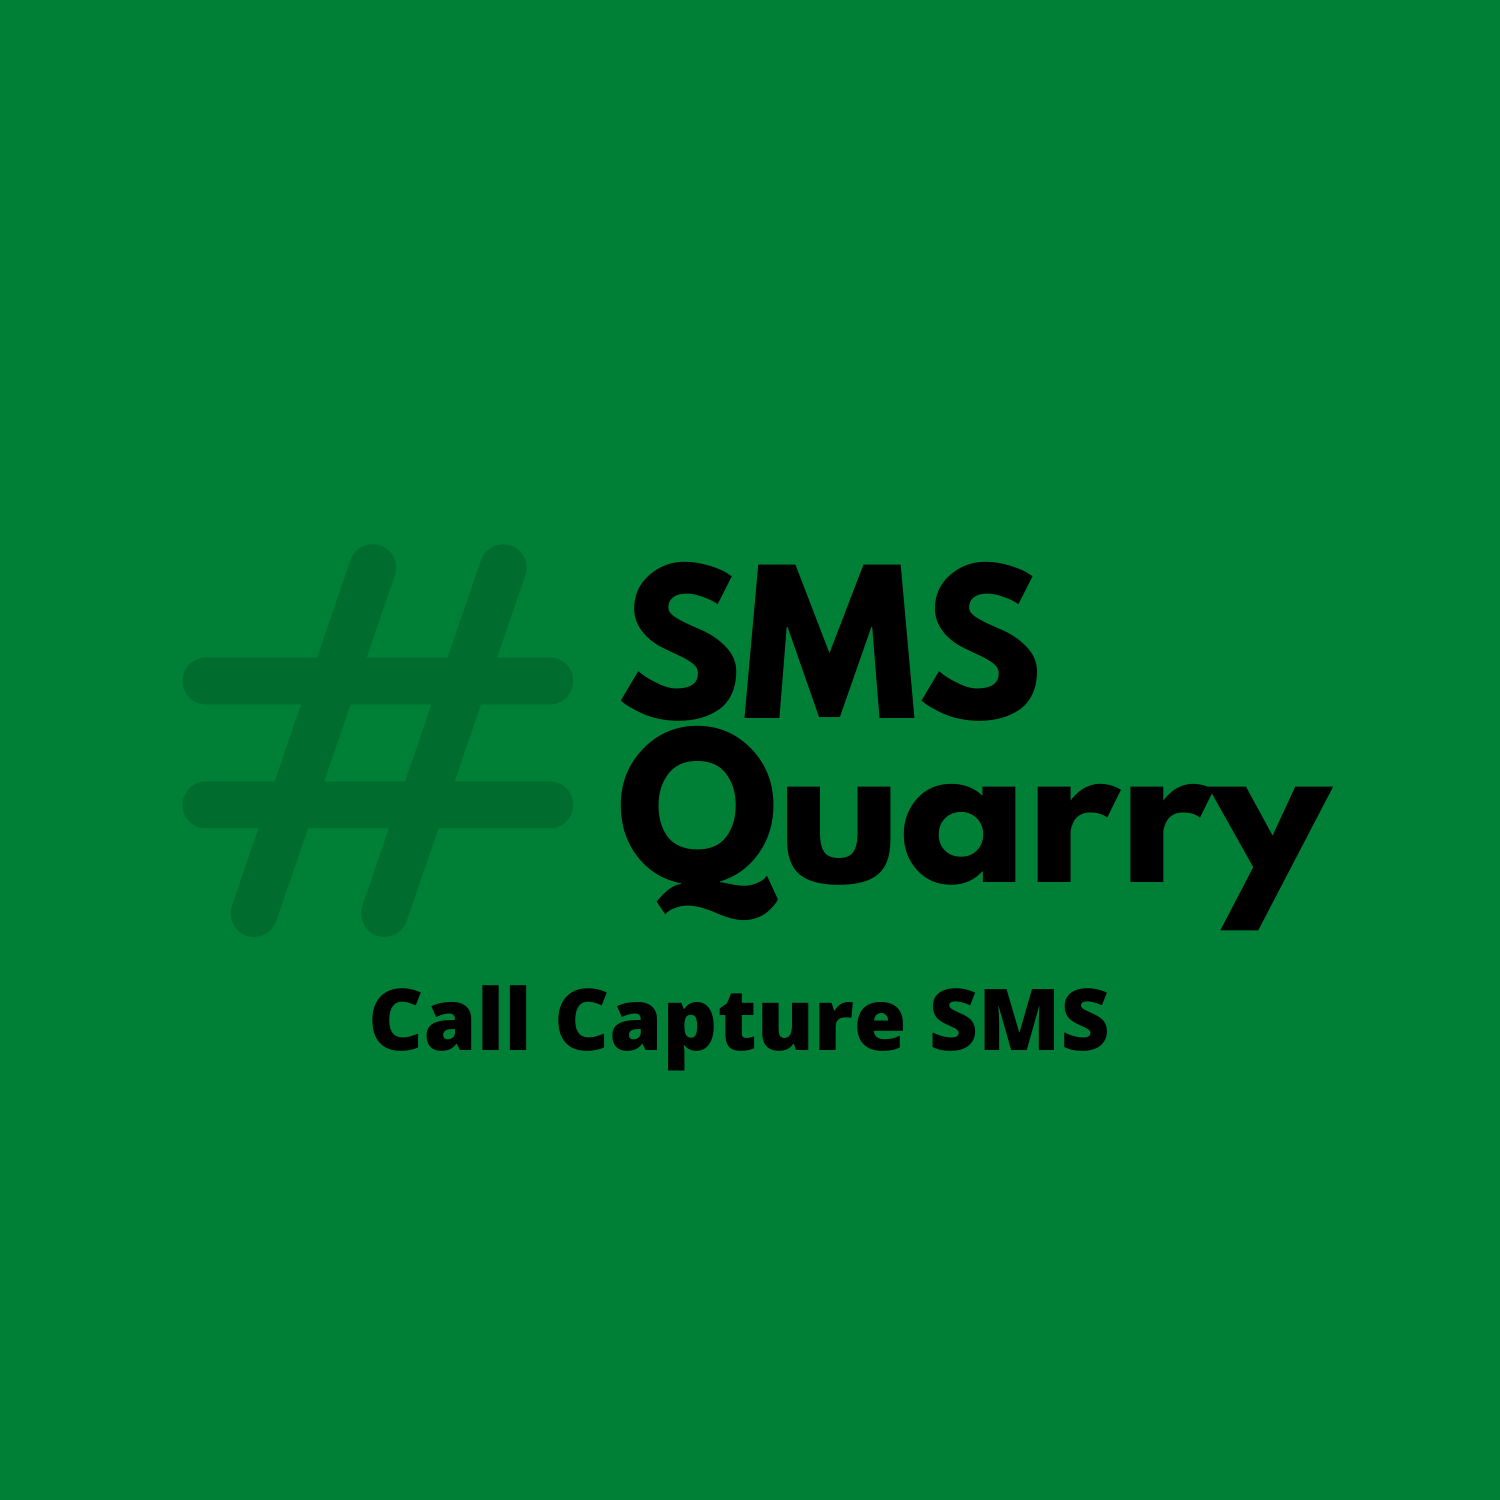 SMS Quarry - Voice and Text Marketing Lead Generation Program